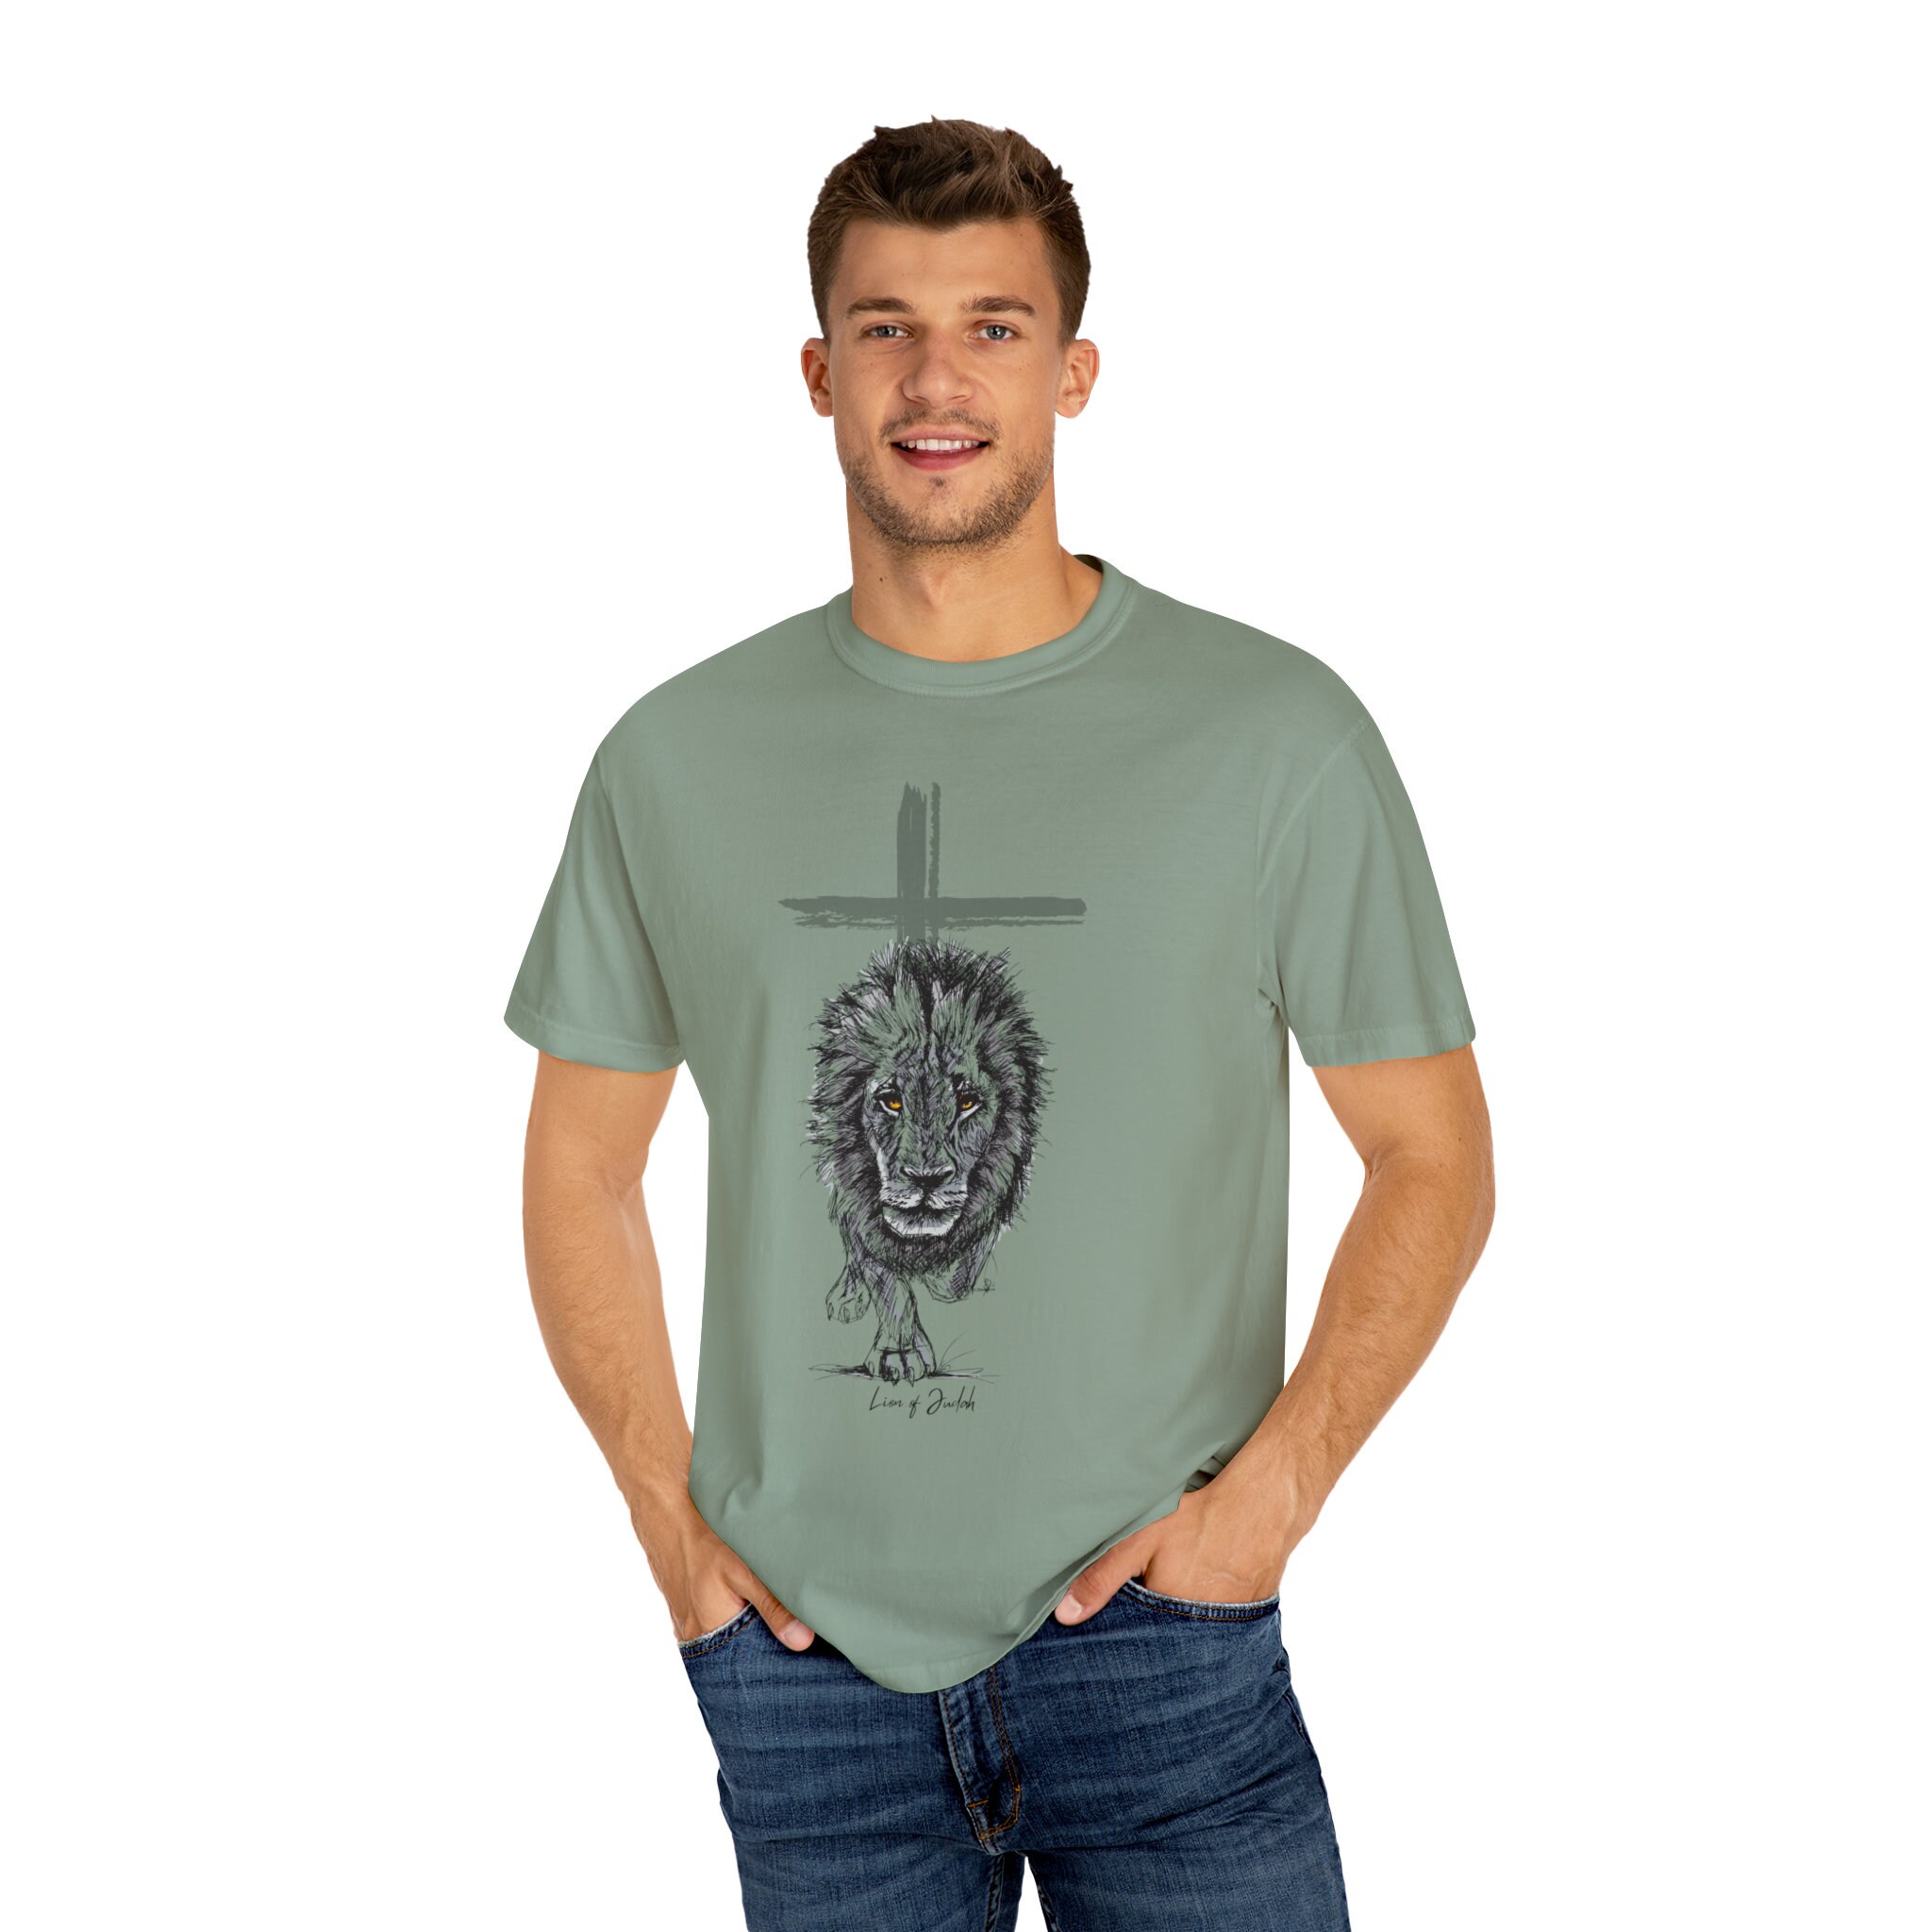 Jesus Lion of Judah I Am ( Name of God ) King of King Lord of Lord 3D All Over Print T-Shirt and Hoodie, Unisex Tank Top / XL